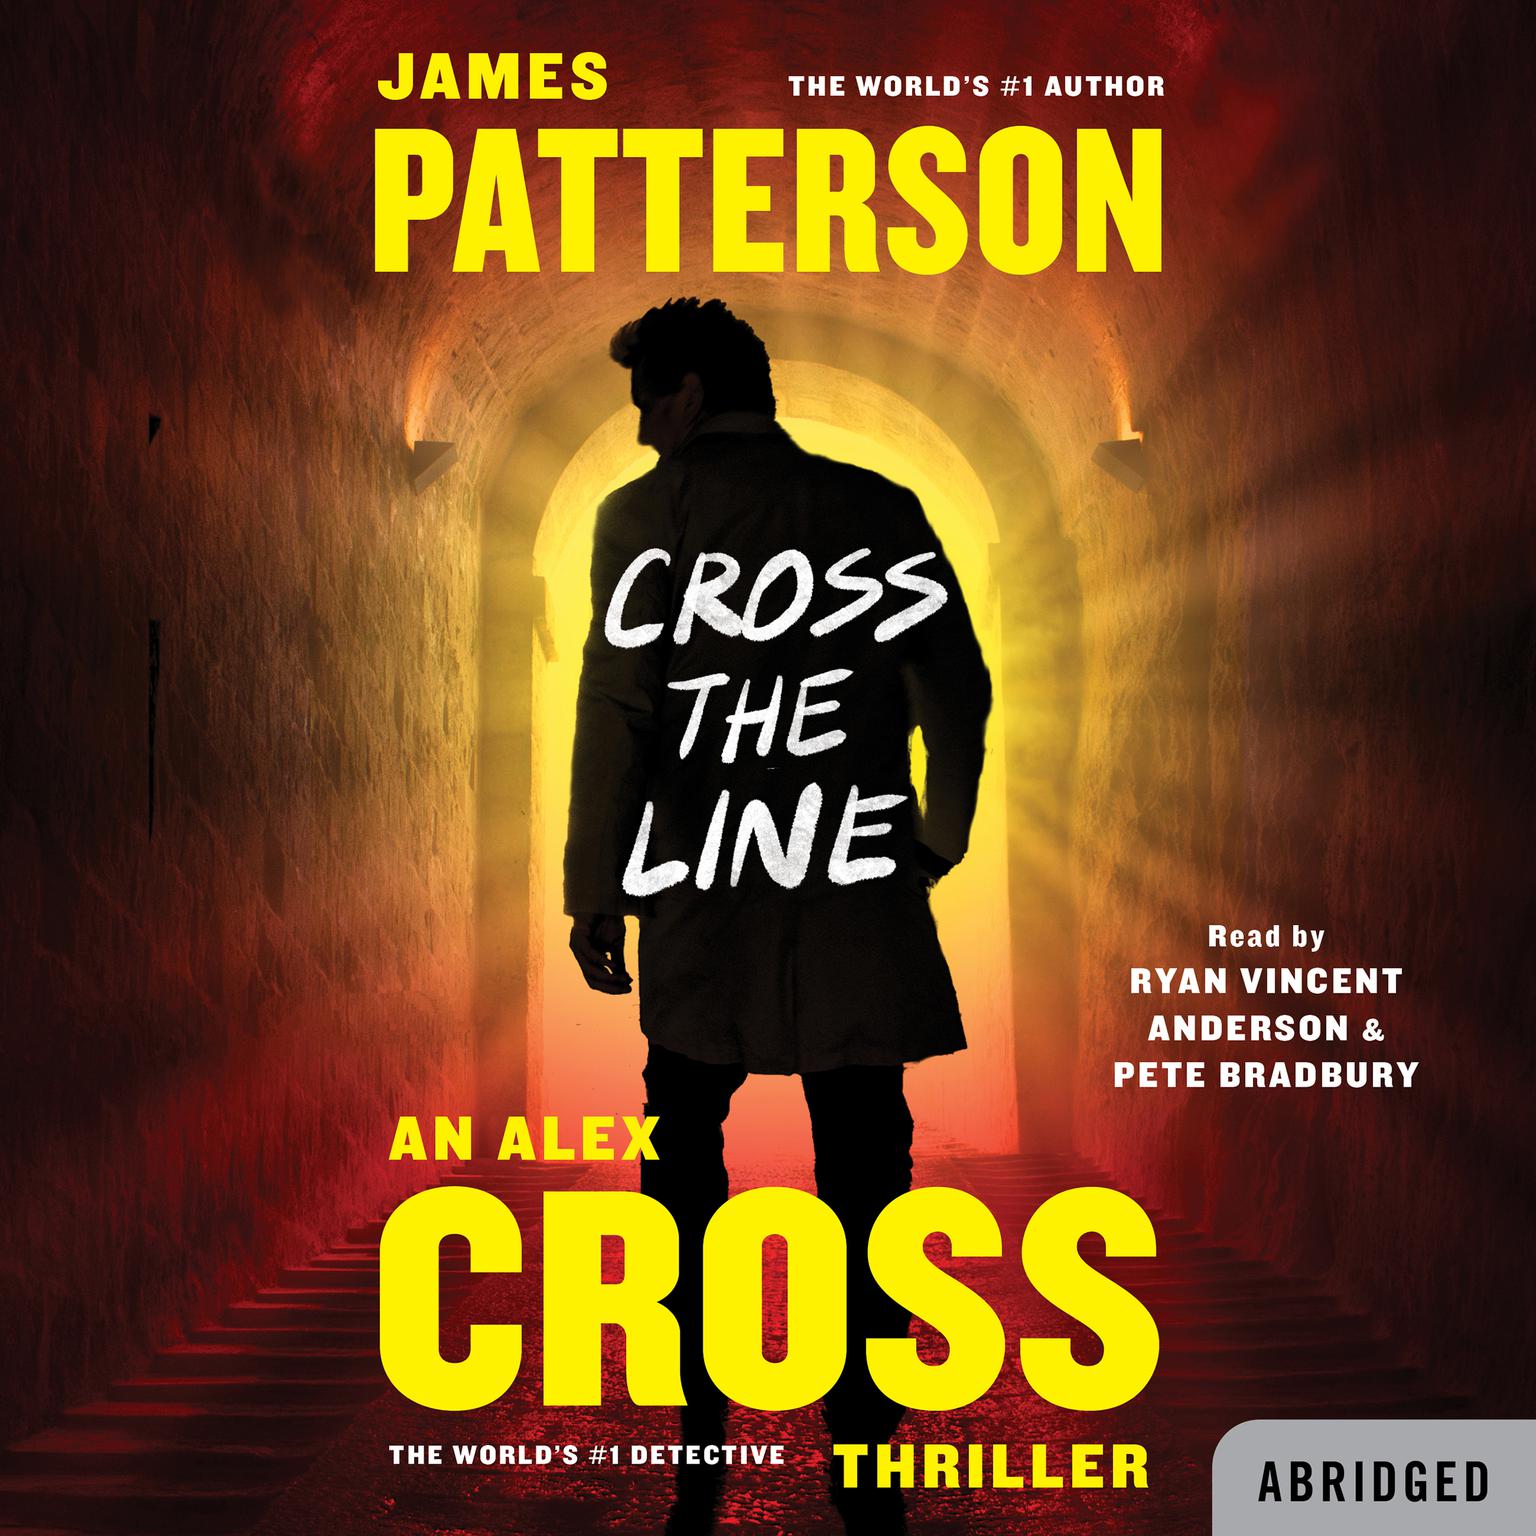 Cross the Line (Abridged) Audiobook, by James Patterson